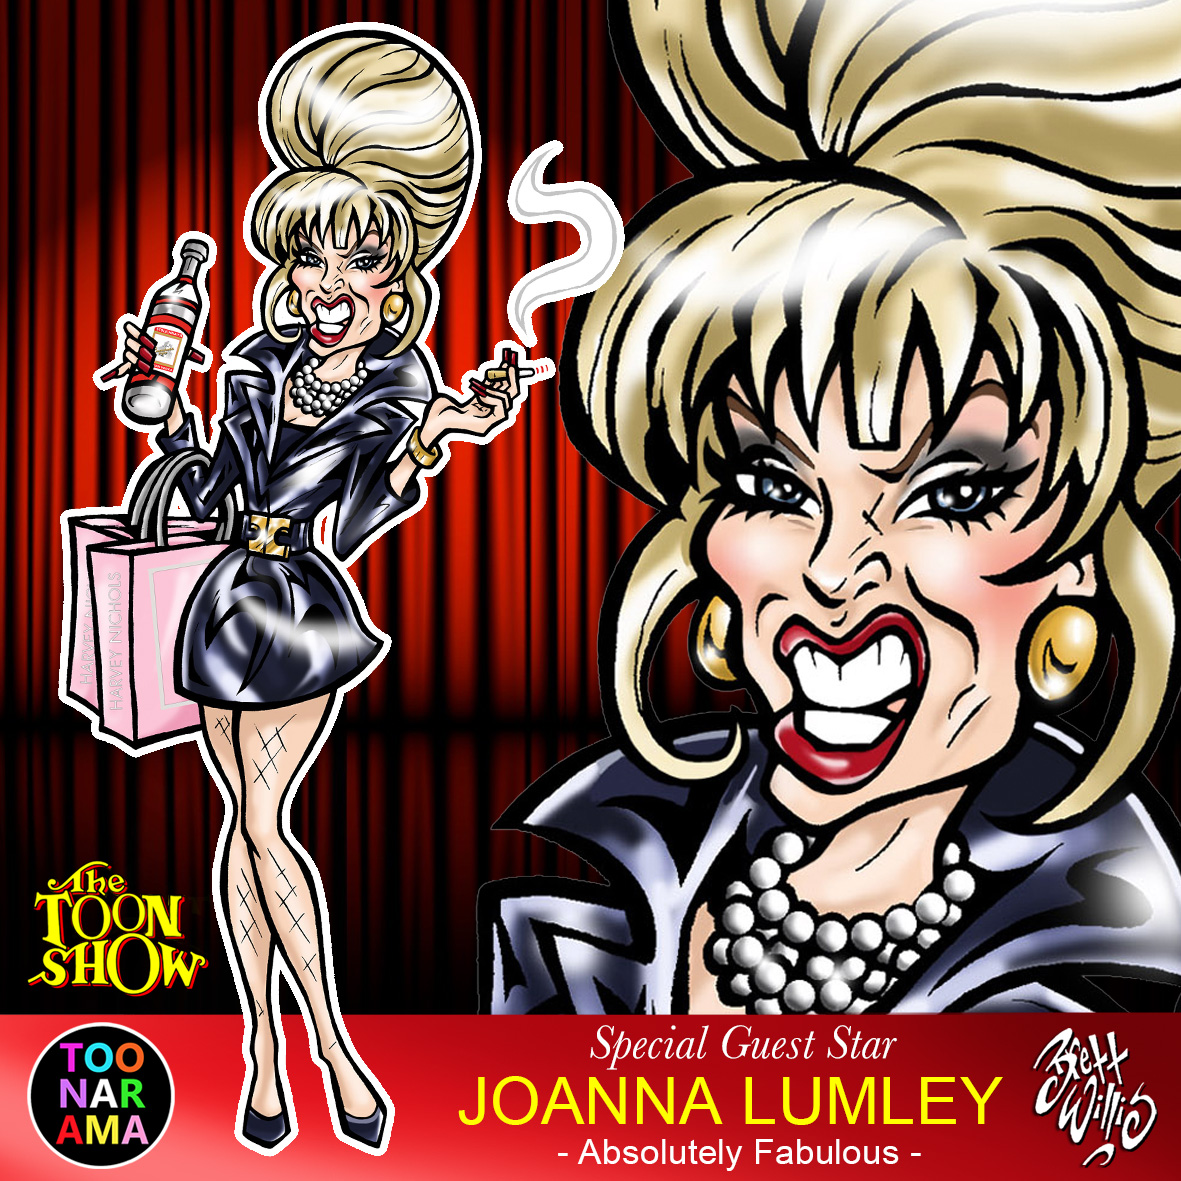 Happy Birthday The TOON Show Special Guest Star JOANNA LUMLEY - Absolutely Fabulous - #HappyBirthday #joannalumley #patsystone #absolutelyfabulous #sweetie #darling #toonarama